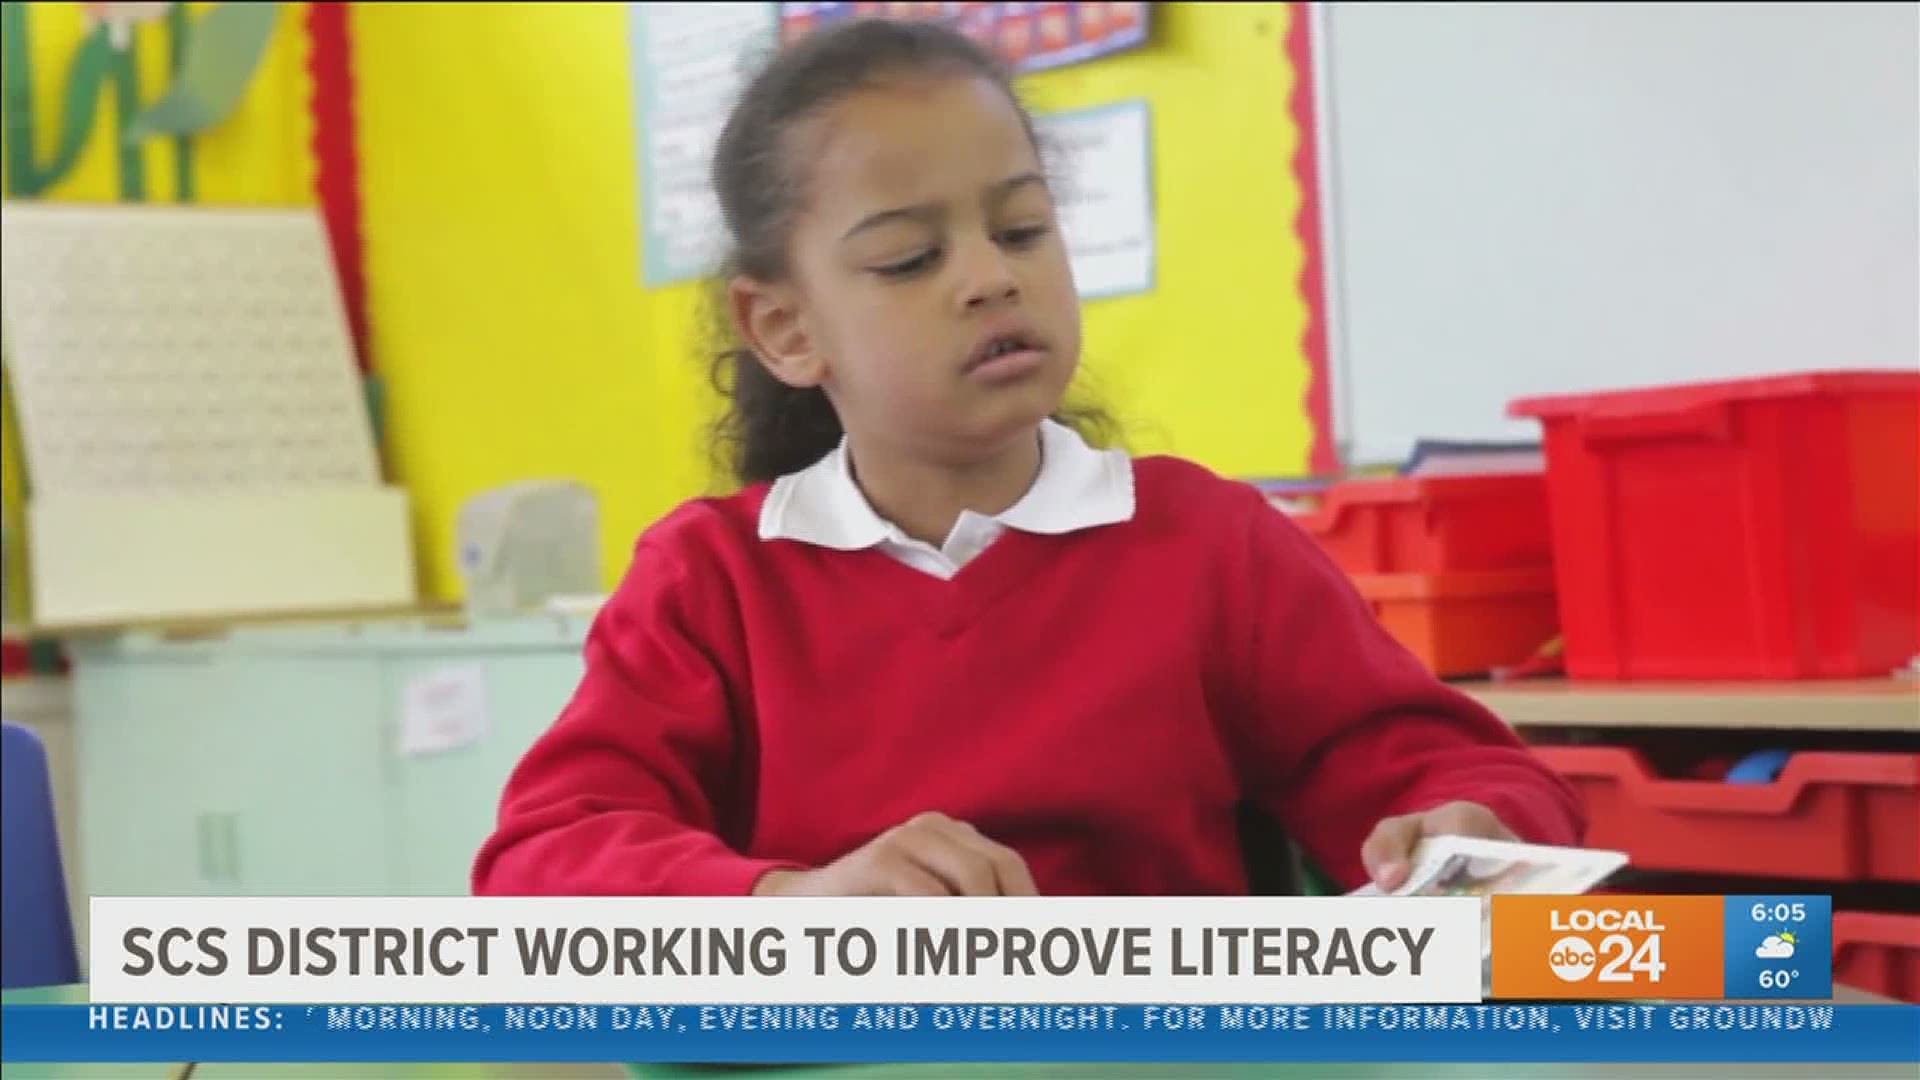 SCS has been working improve reading abilities after testing showed 75% of third graders couldn't read proficiently